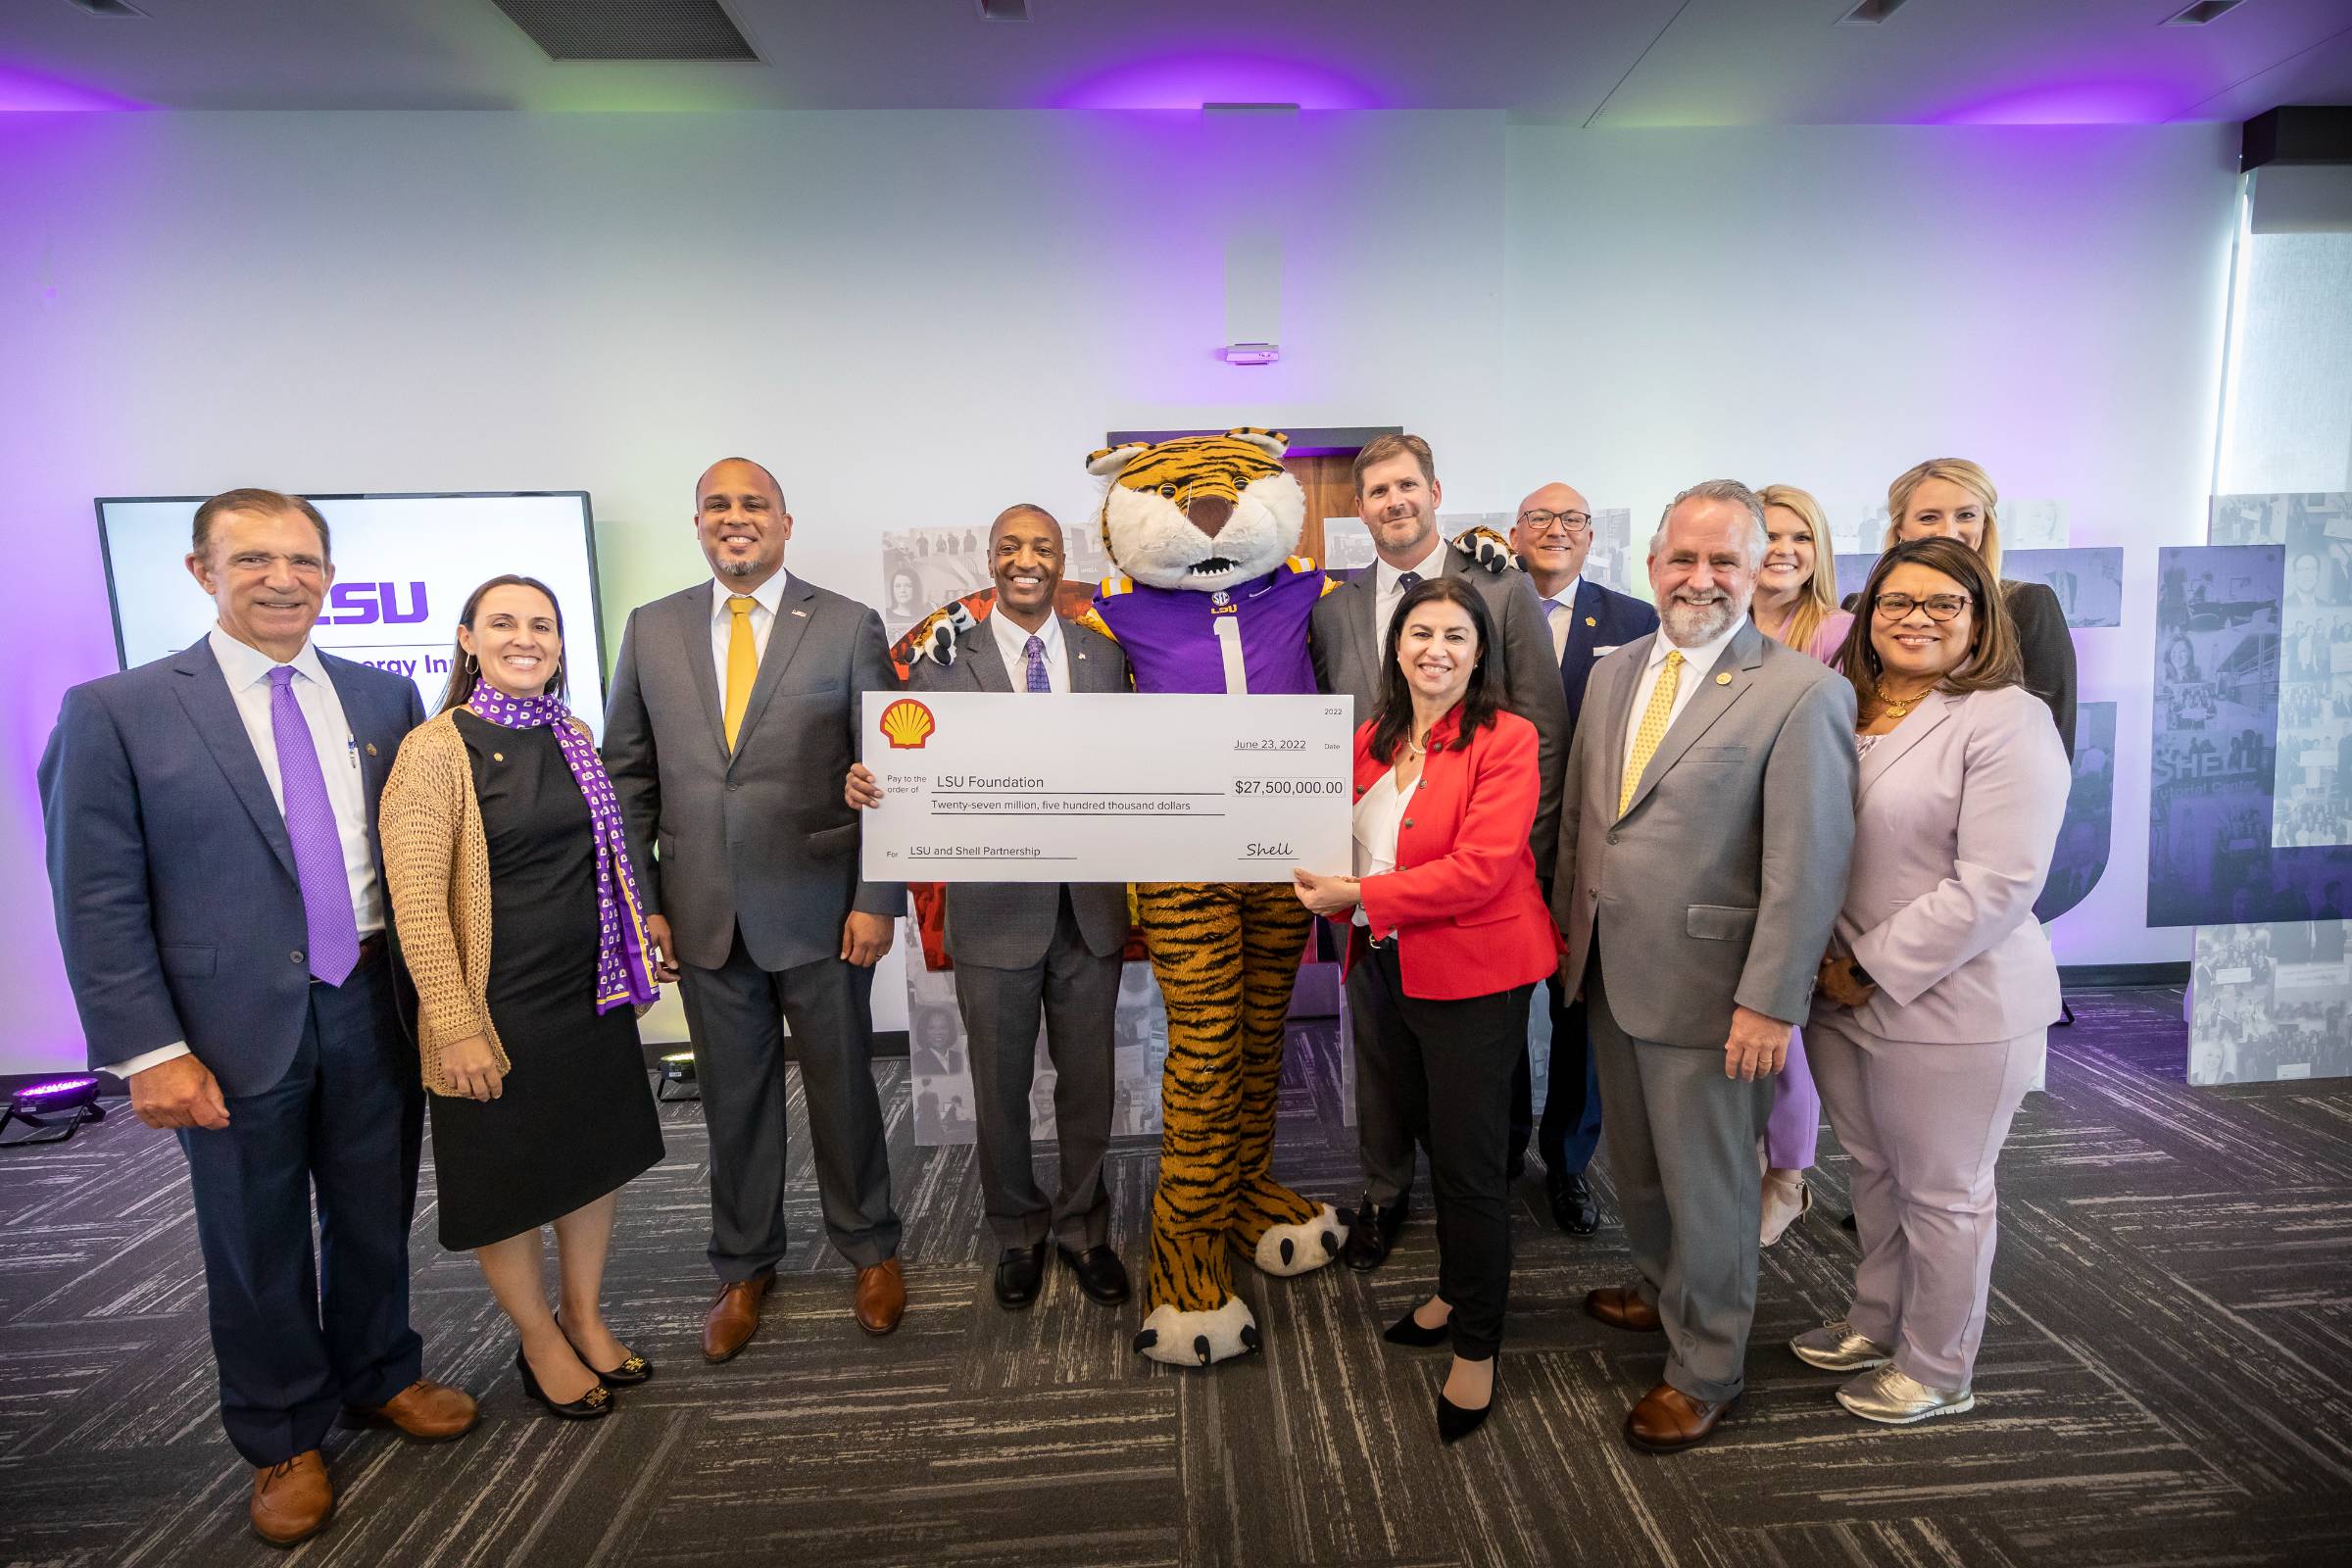 LSU and Shell officials pose with Mike the Tiger and display check showing Shell's gift to LSU